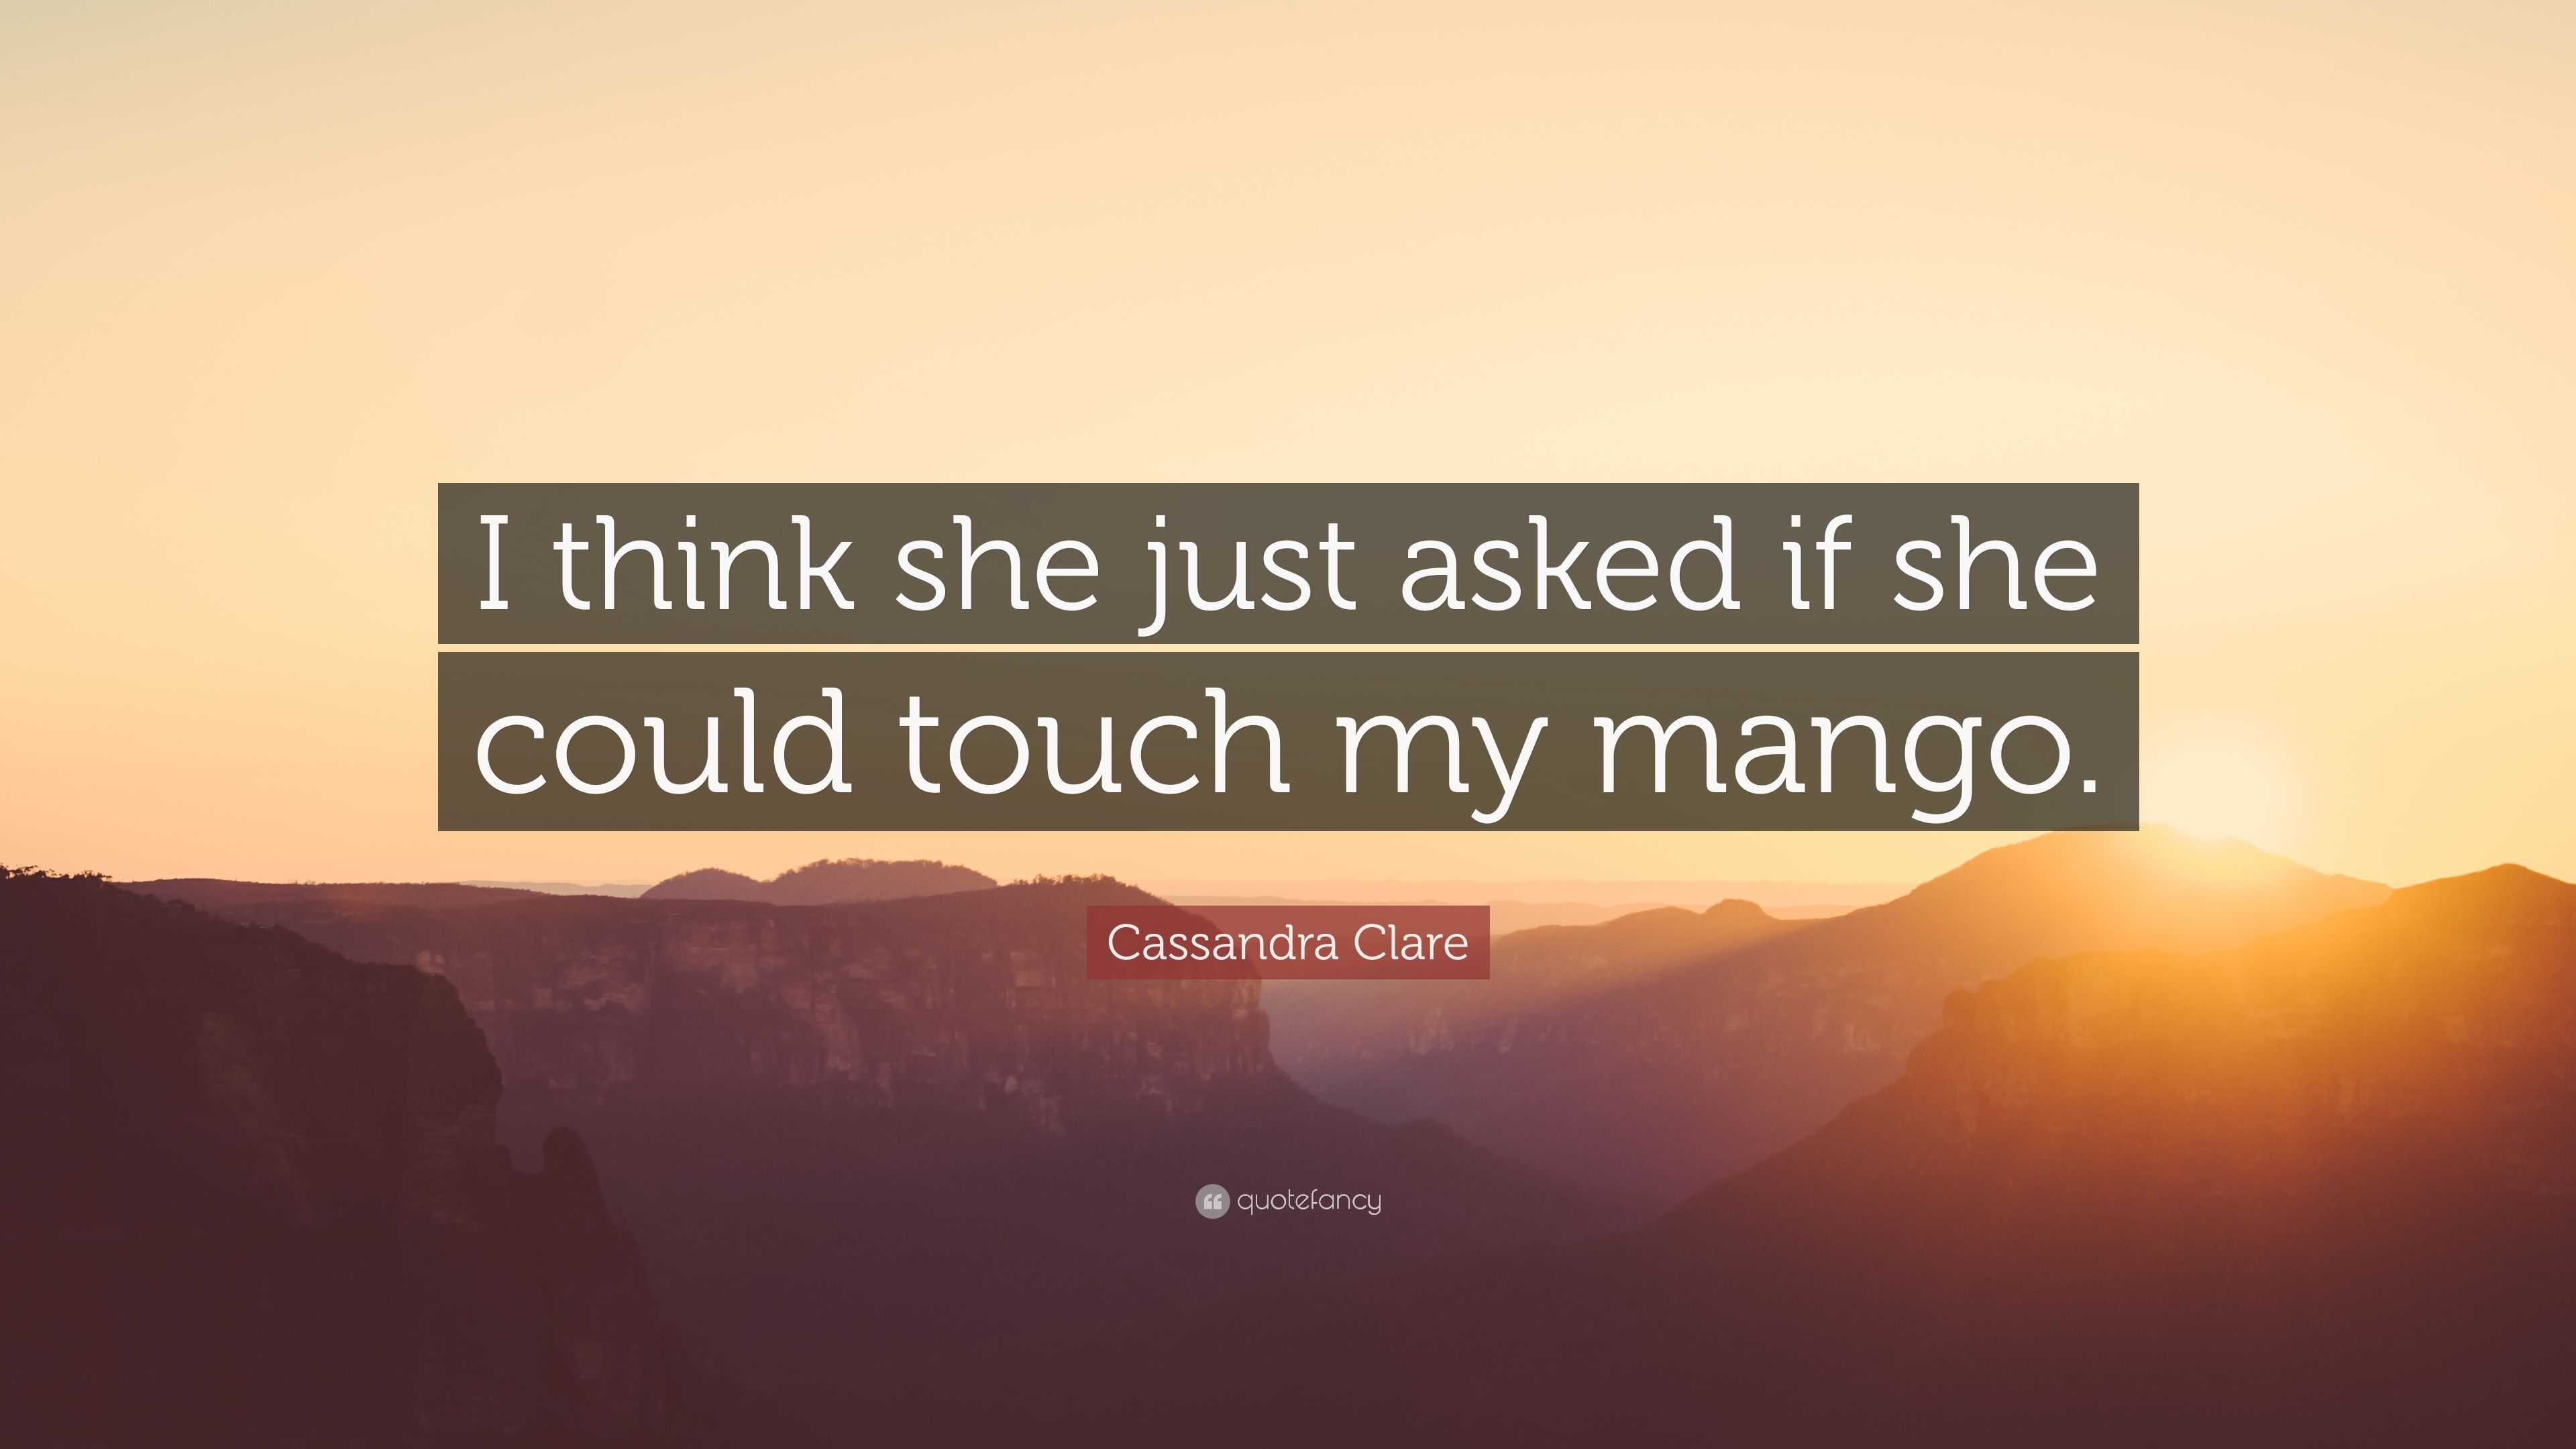 Cassandra Clare Quote “i Think She Just Asked If She Could Touch My Mango ”